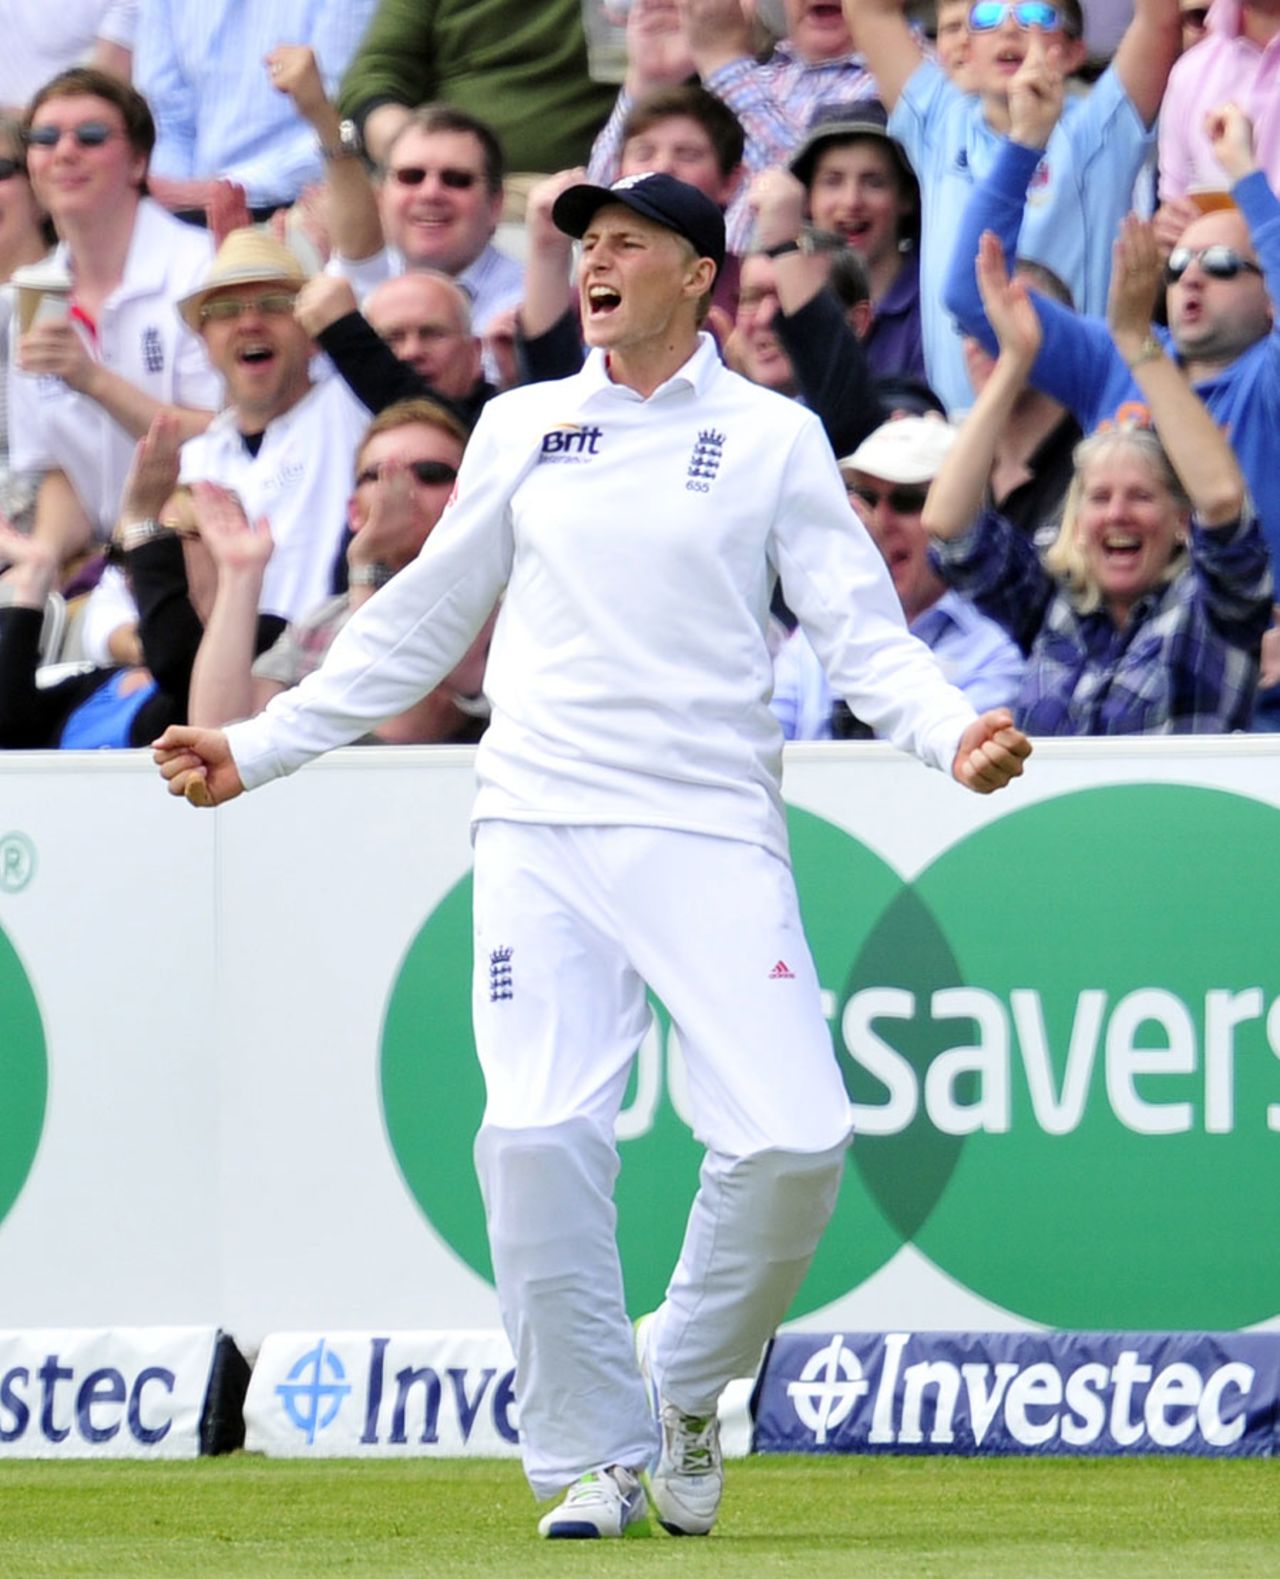 Joe Root roars after catching Tim Southee on the boundary, England v New Zealand, 1st Investec Test, Lord's, 4th day, May 19, 2013